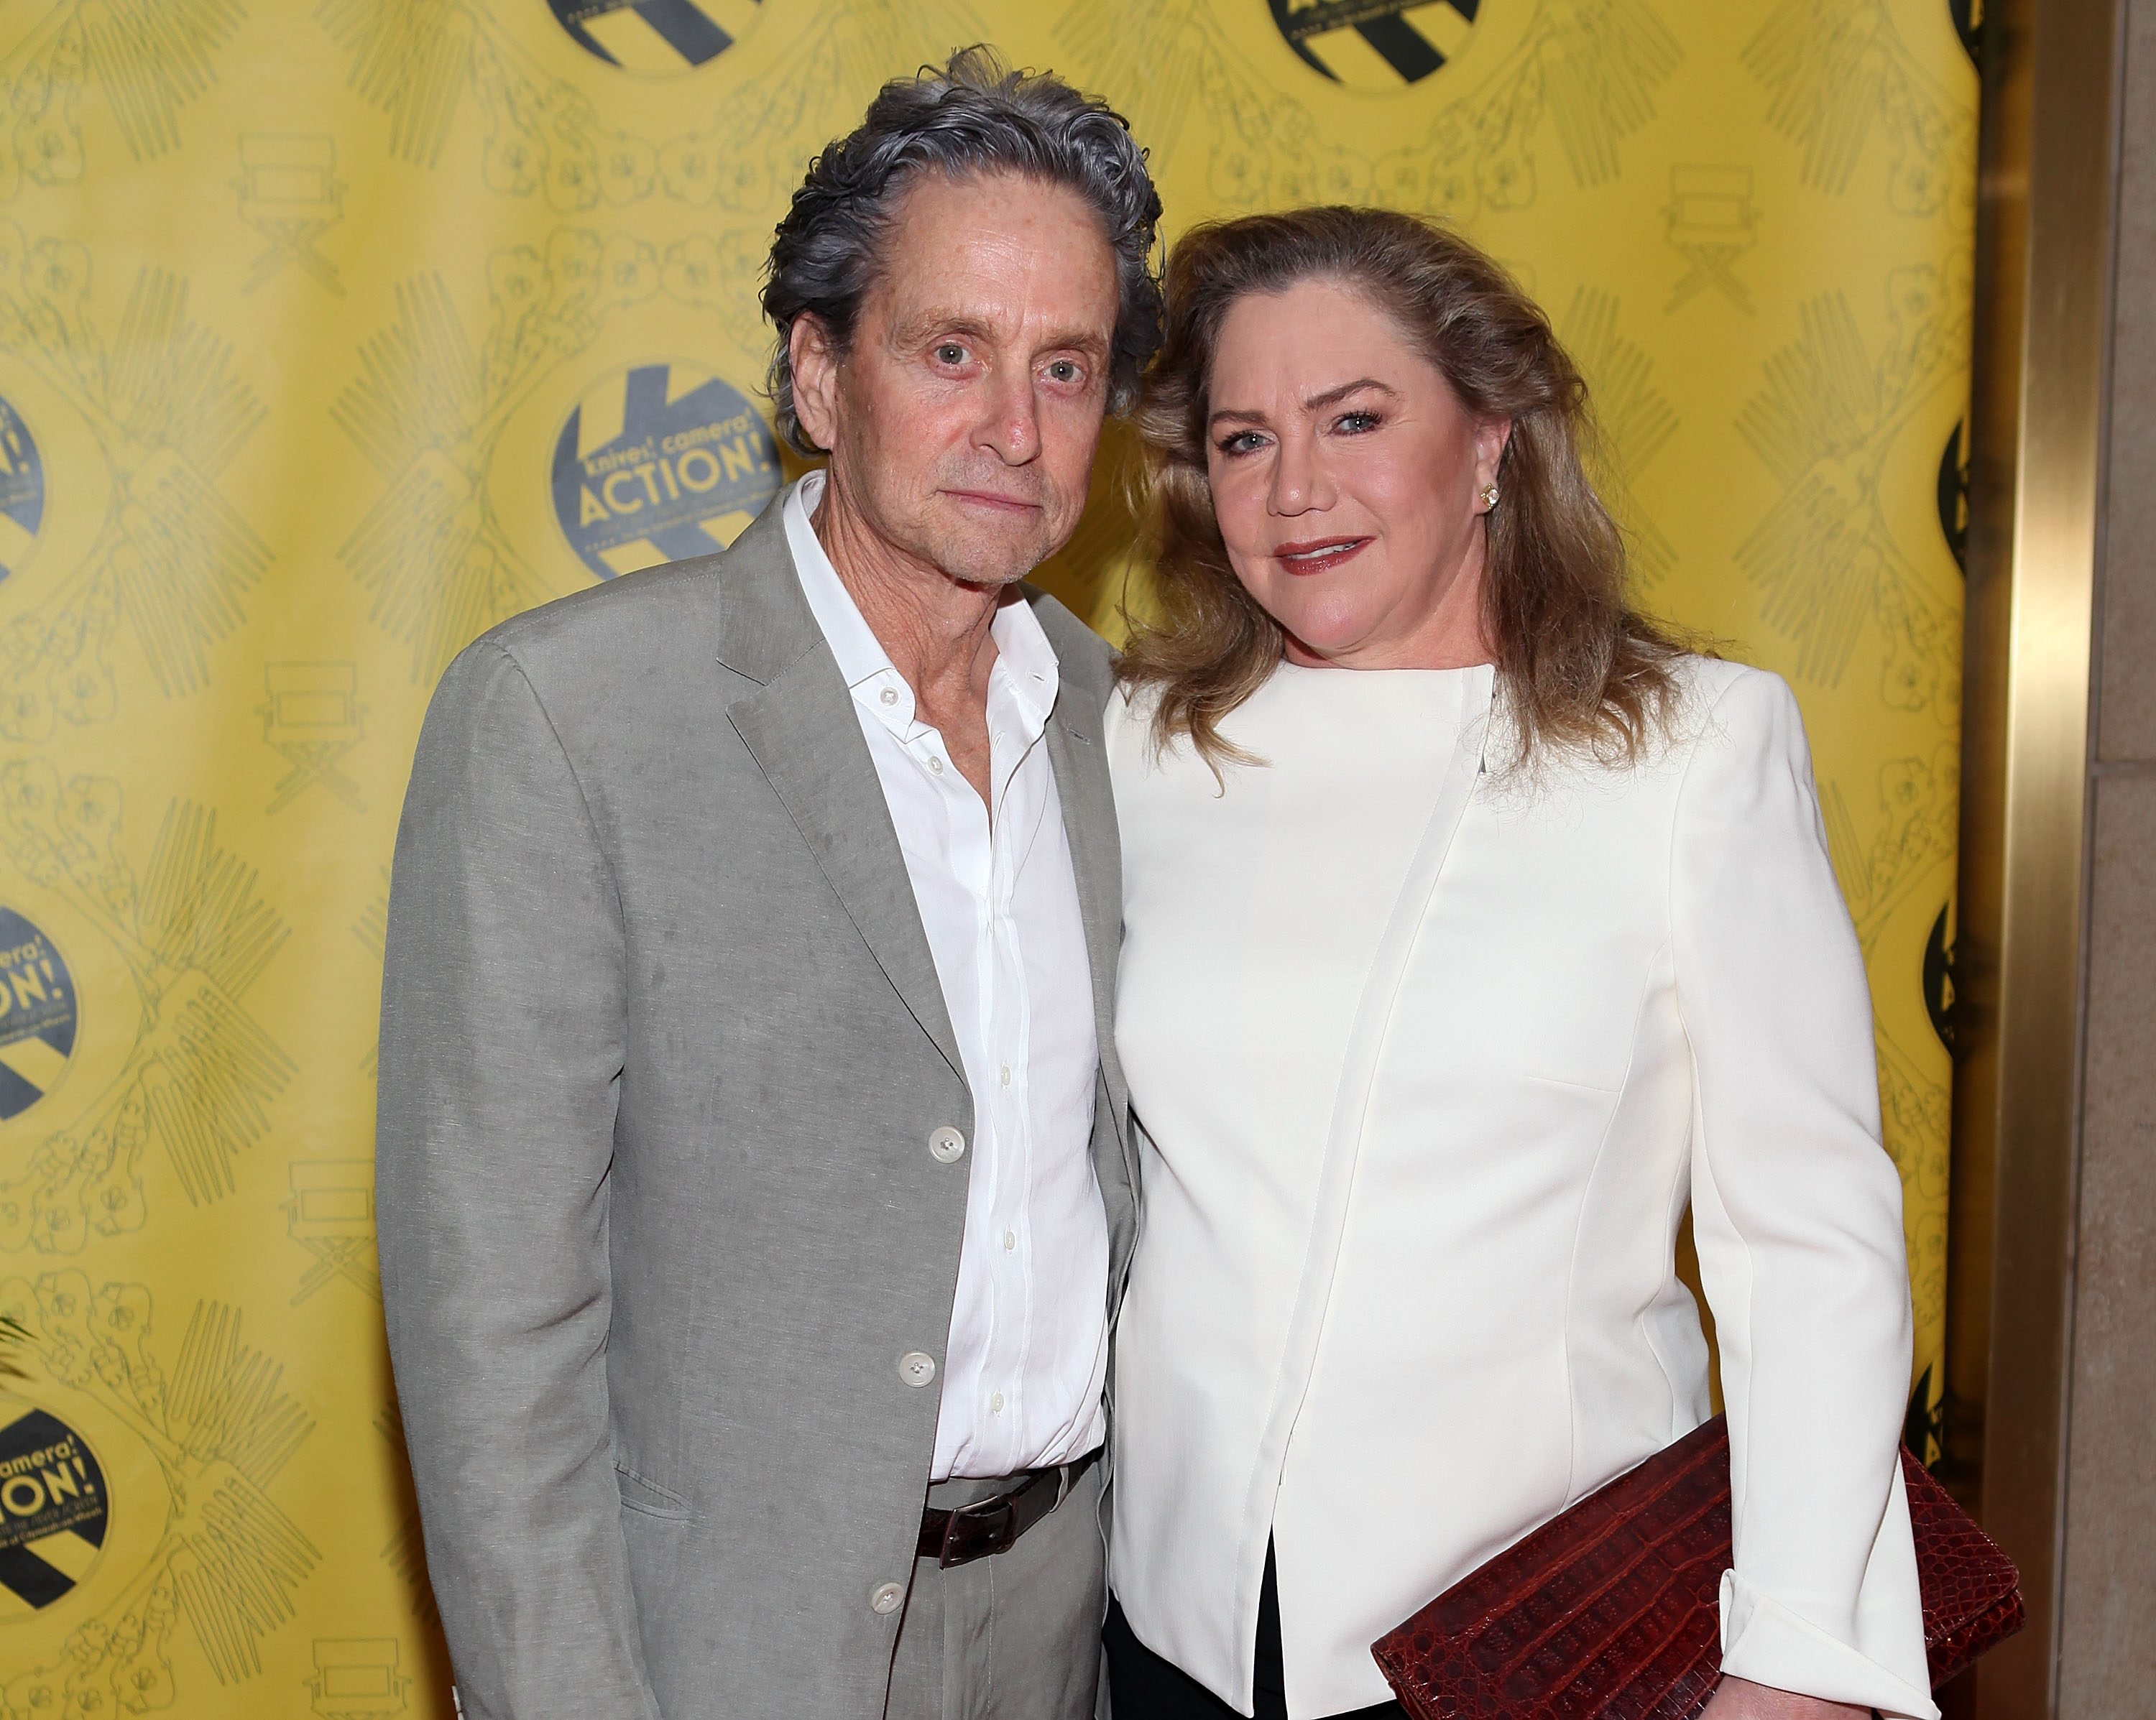 Michael Douglas and Kathleen Turner at the Chefs' Tribute To Citymeals-On-Wheels Benefit in New York in 2012 | Source: Getty Images